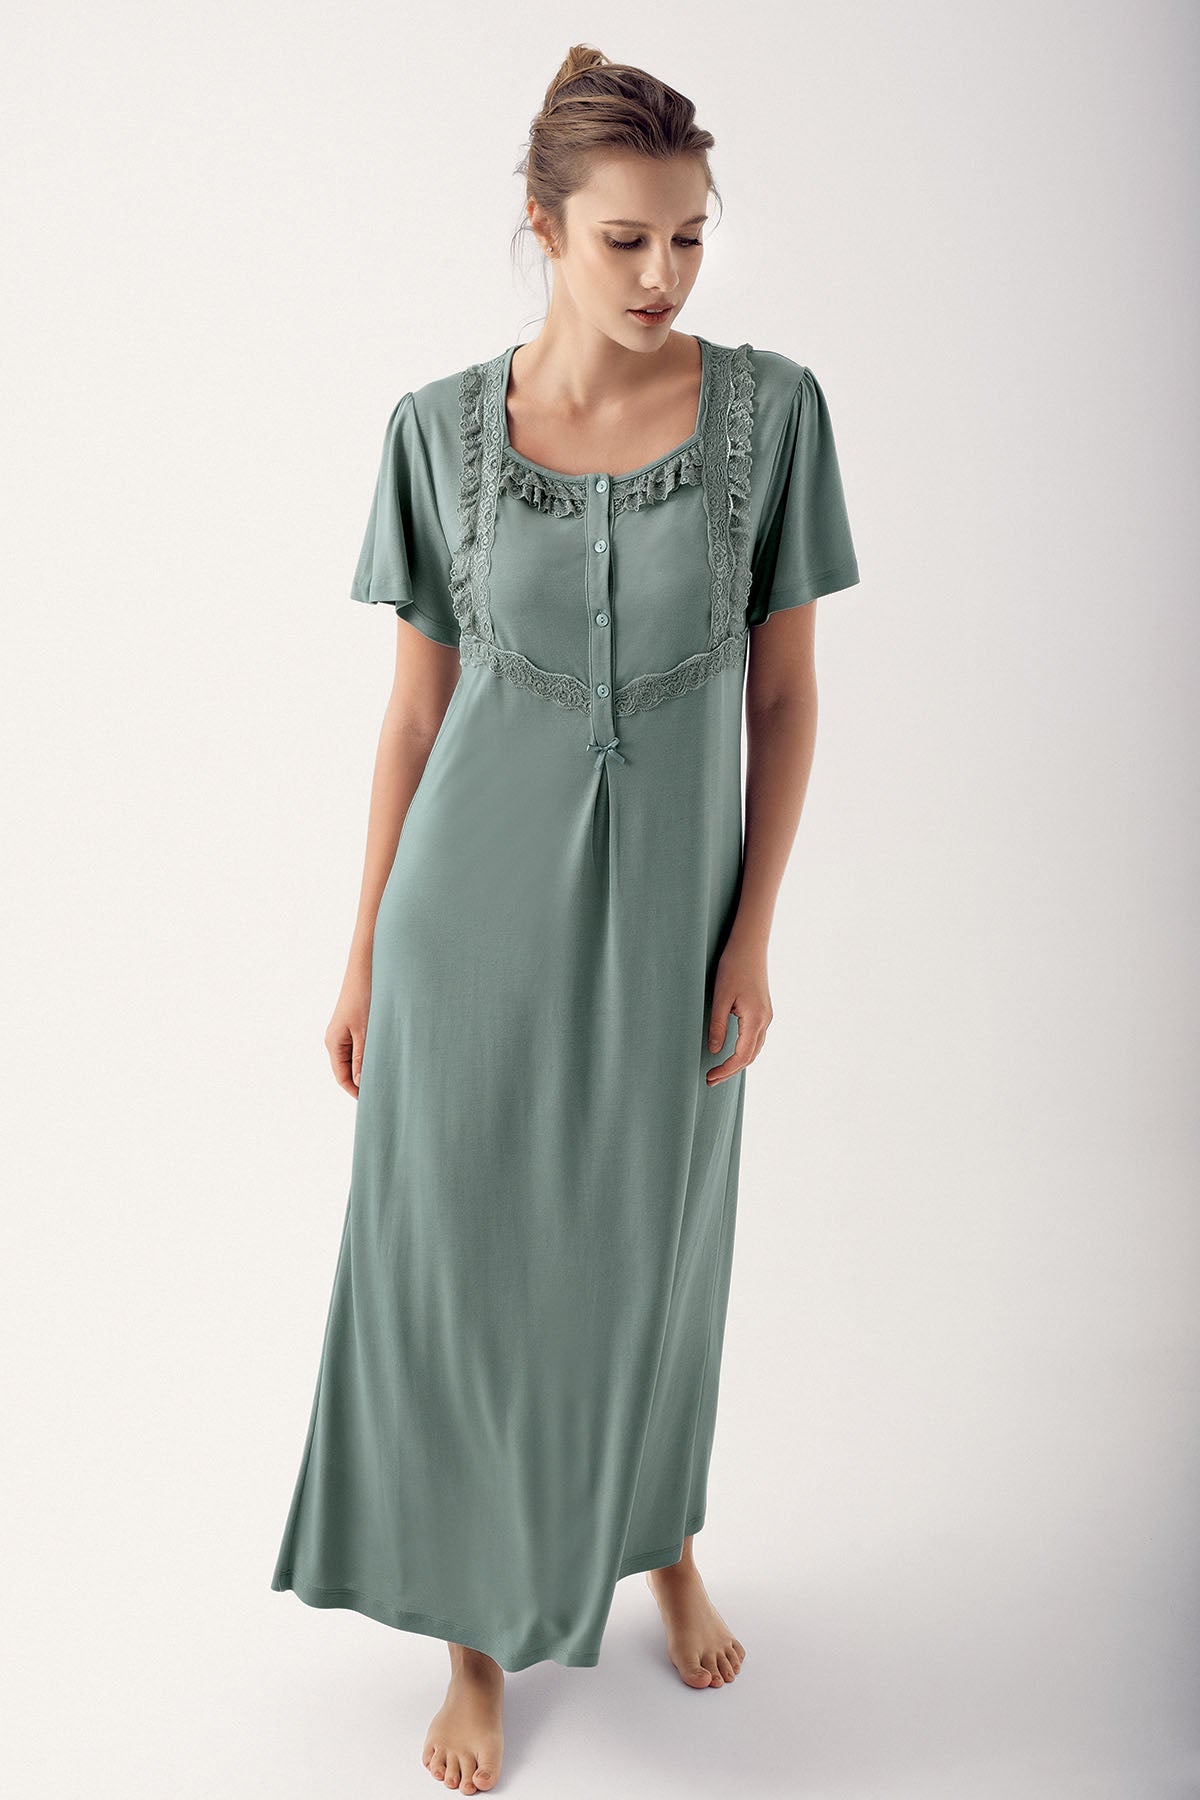 Square Collar Lace Plus Size Maternity & Nursing Nightgown Green - 14110